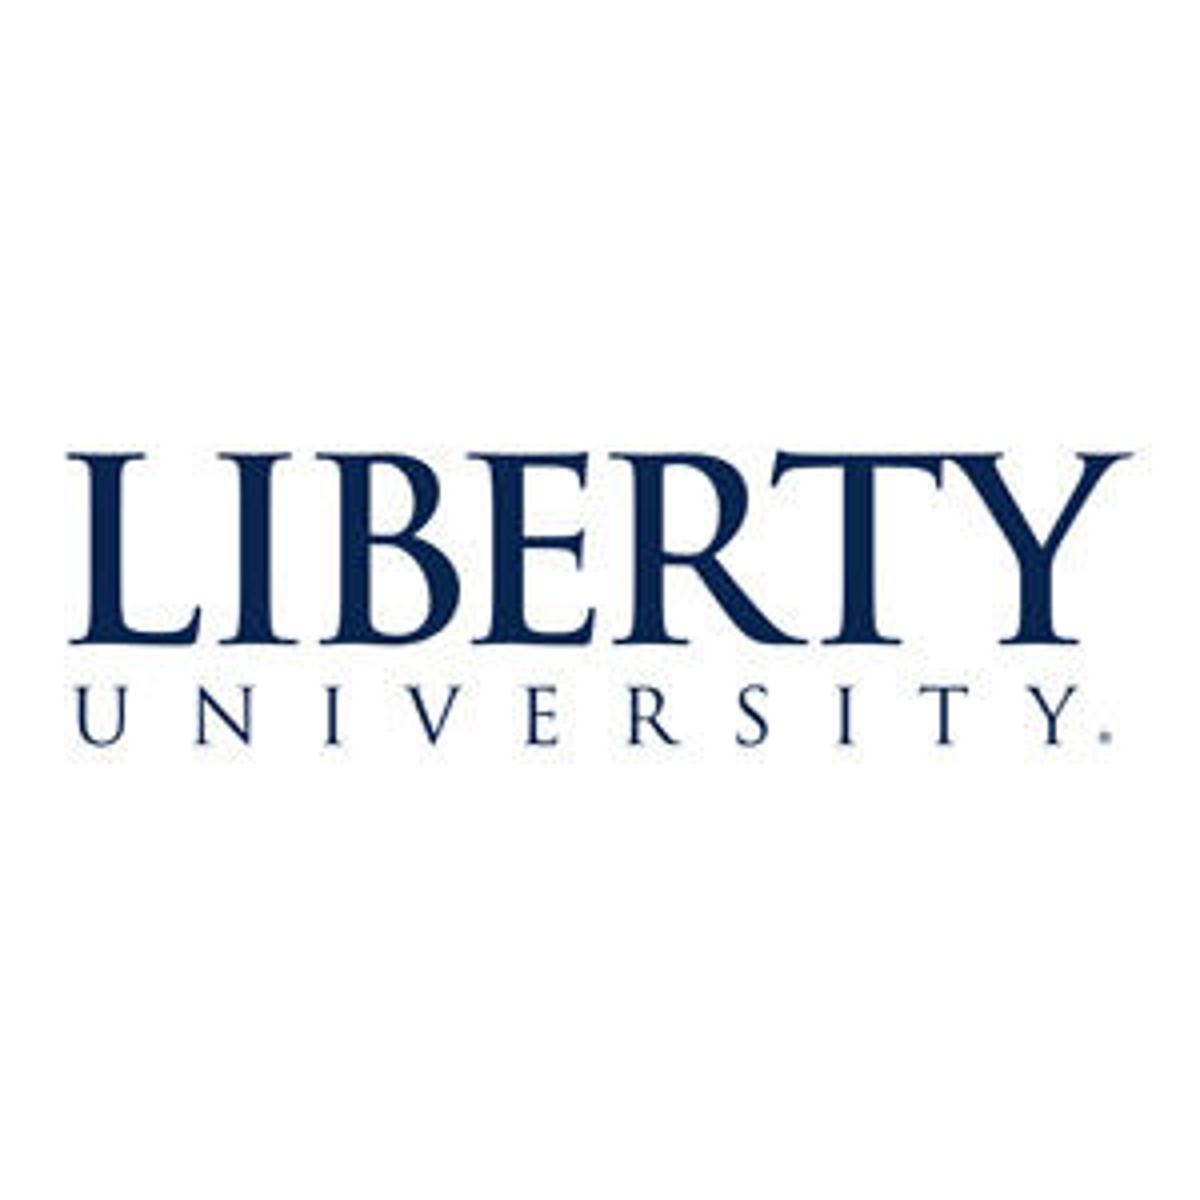 Liberty University – Top 50 Most Affordable Master’s in Higher Education Online Programs 2020